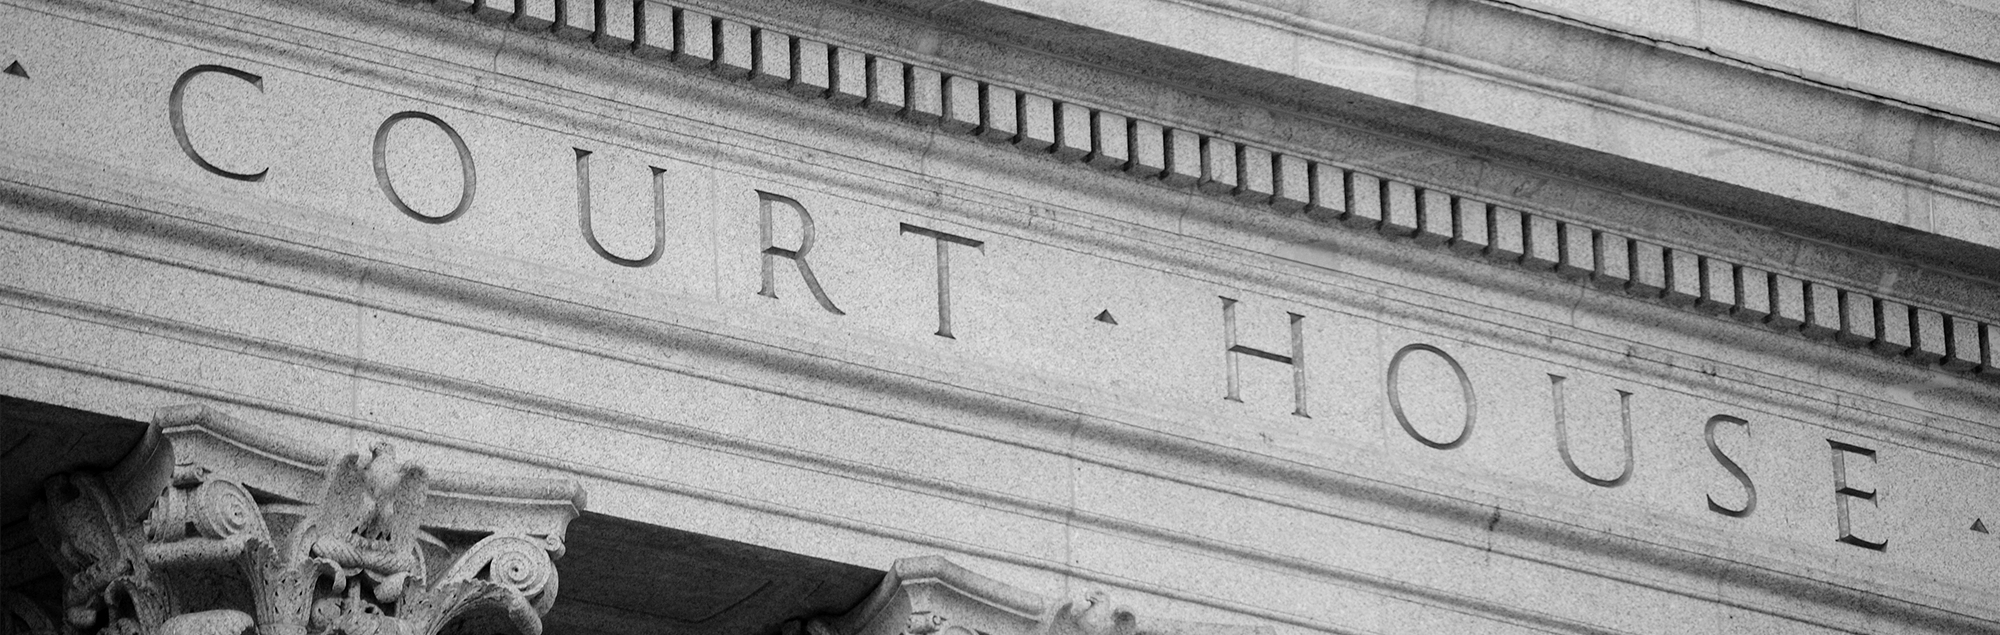 Marble courthouse building facade in black and white.